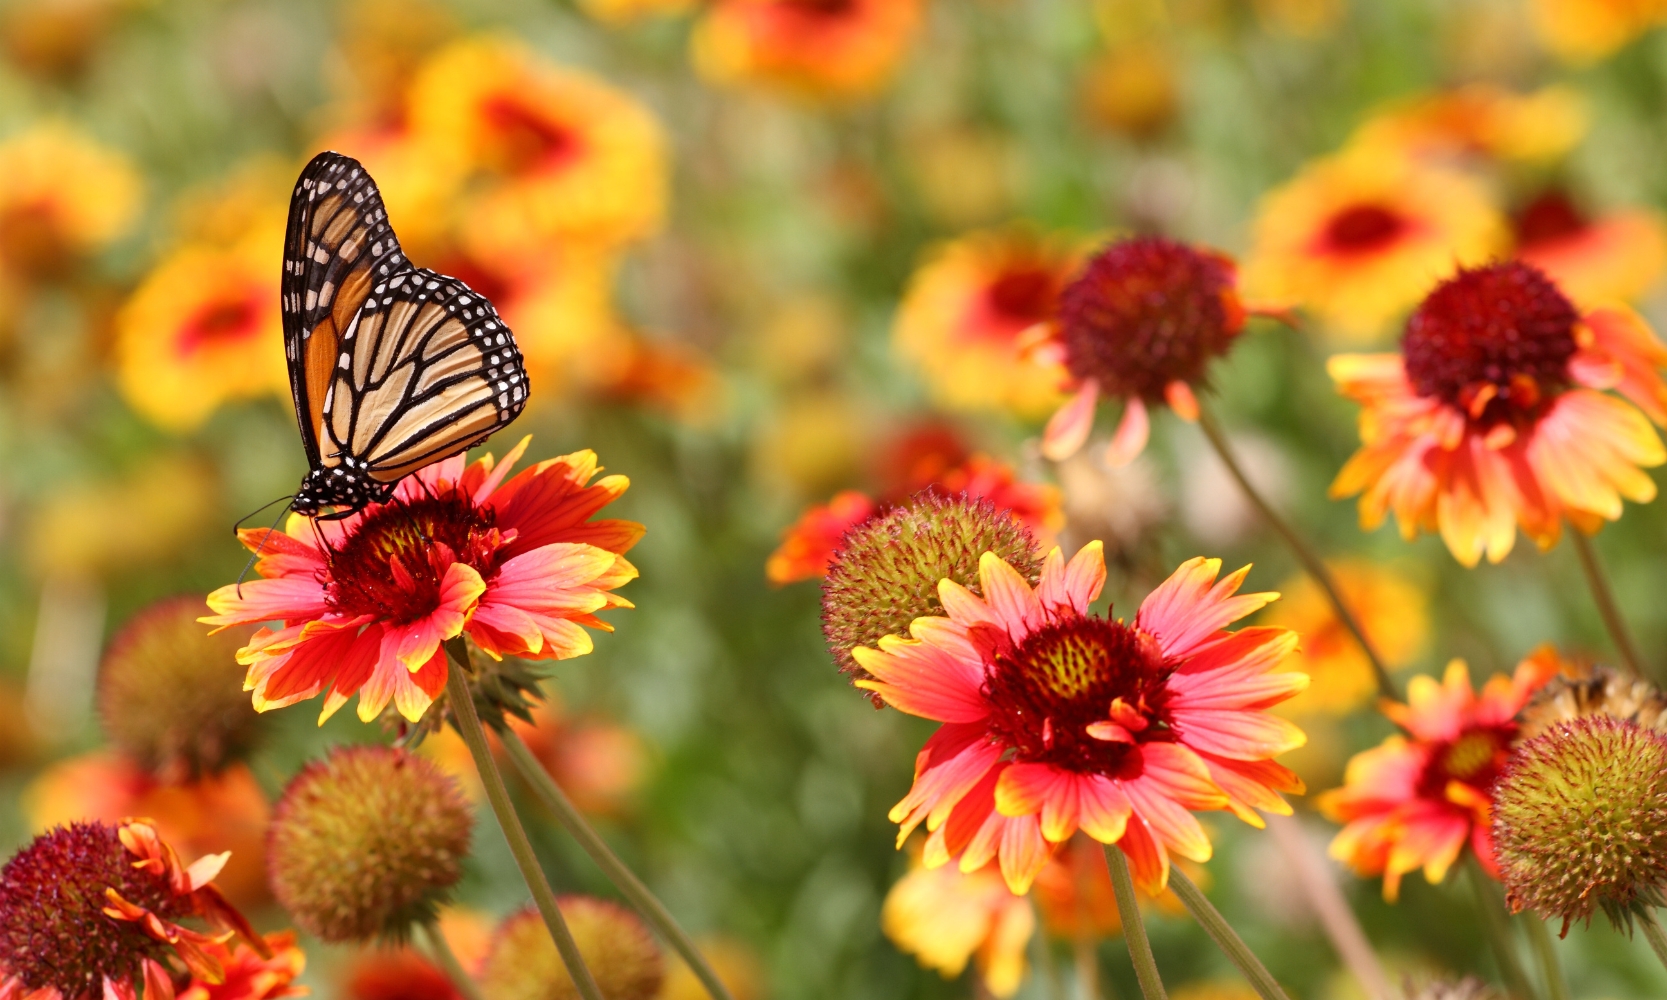 A close-up image of a Monarch butterfly on top of vibrant red and orange flowers